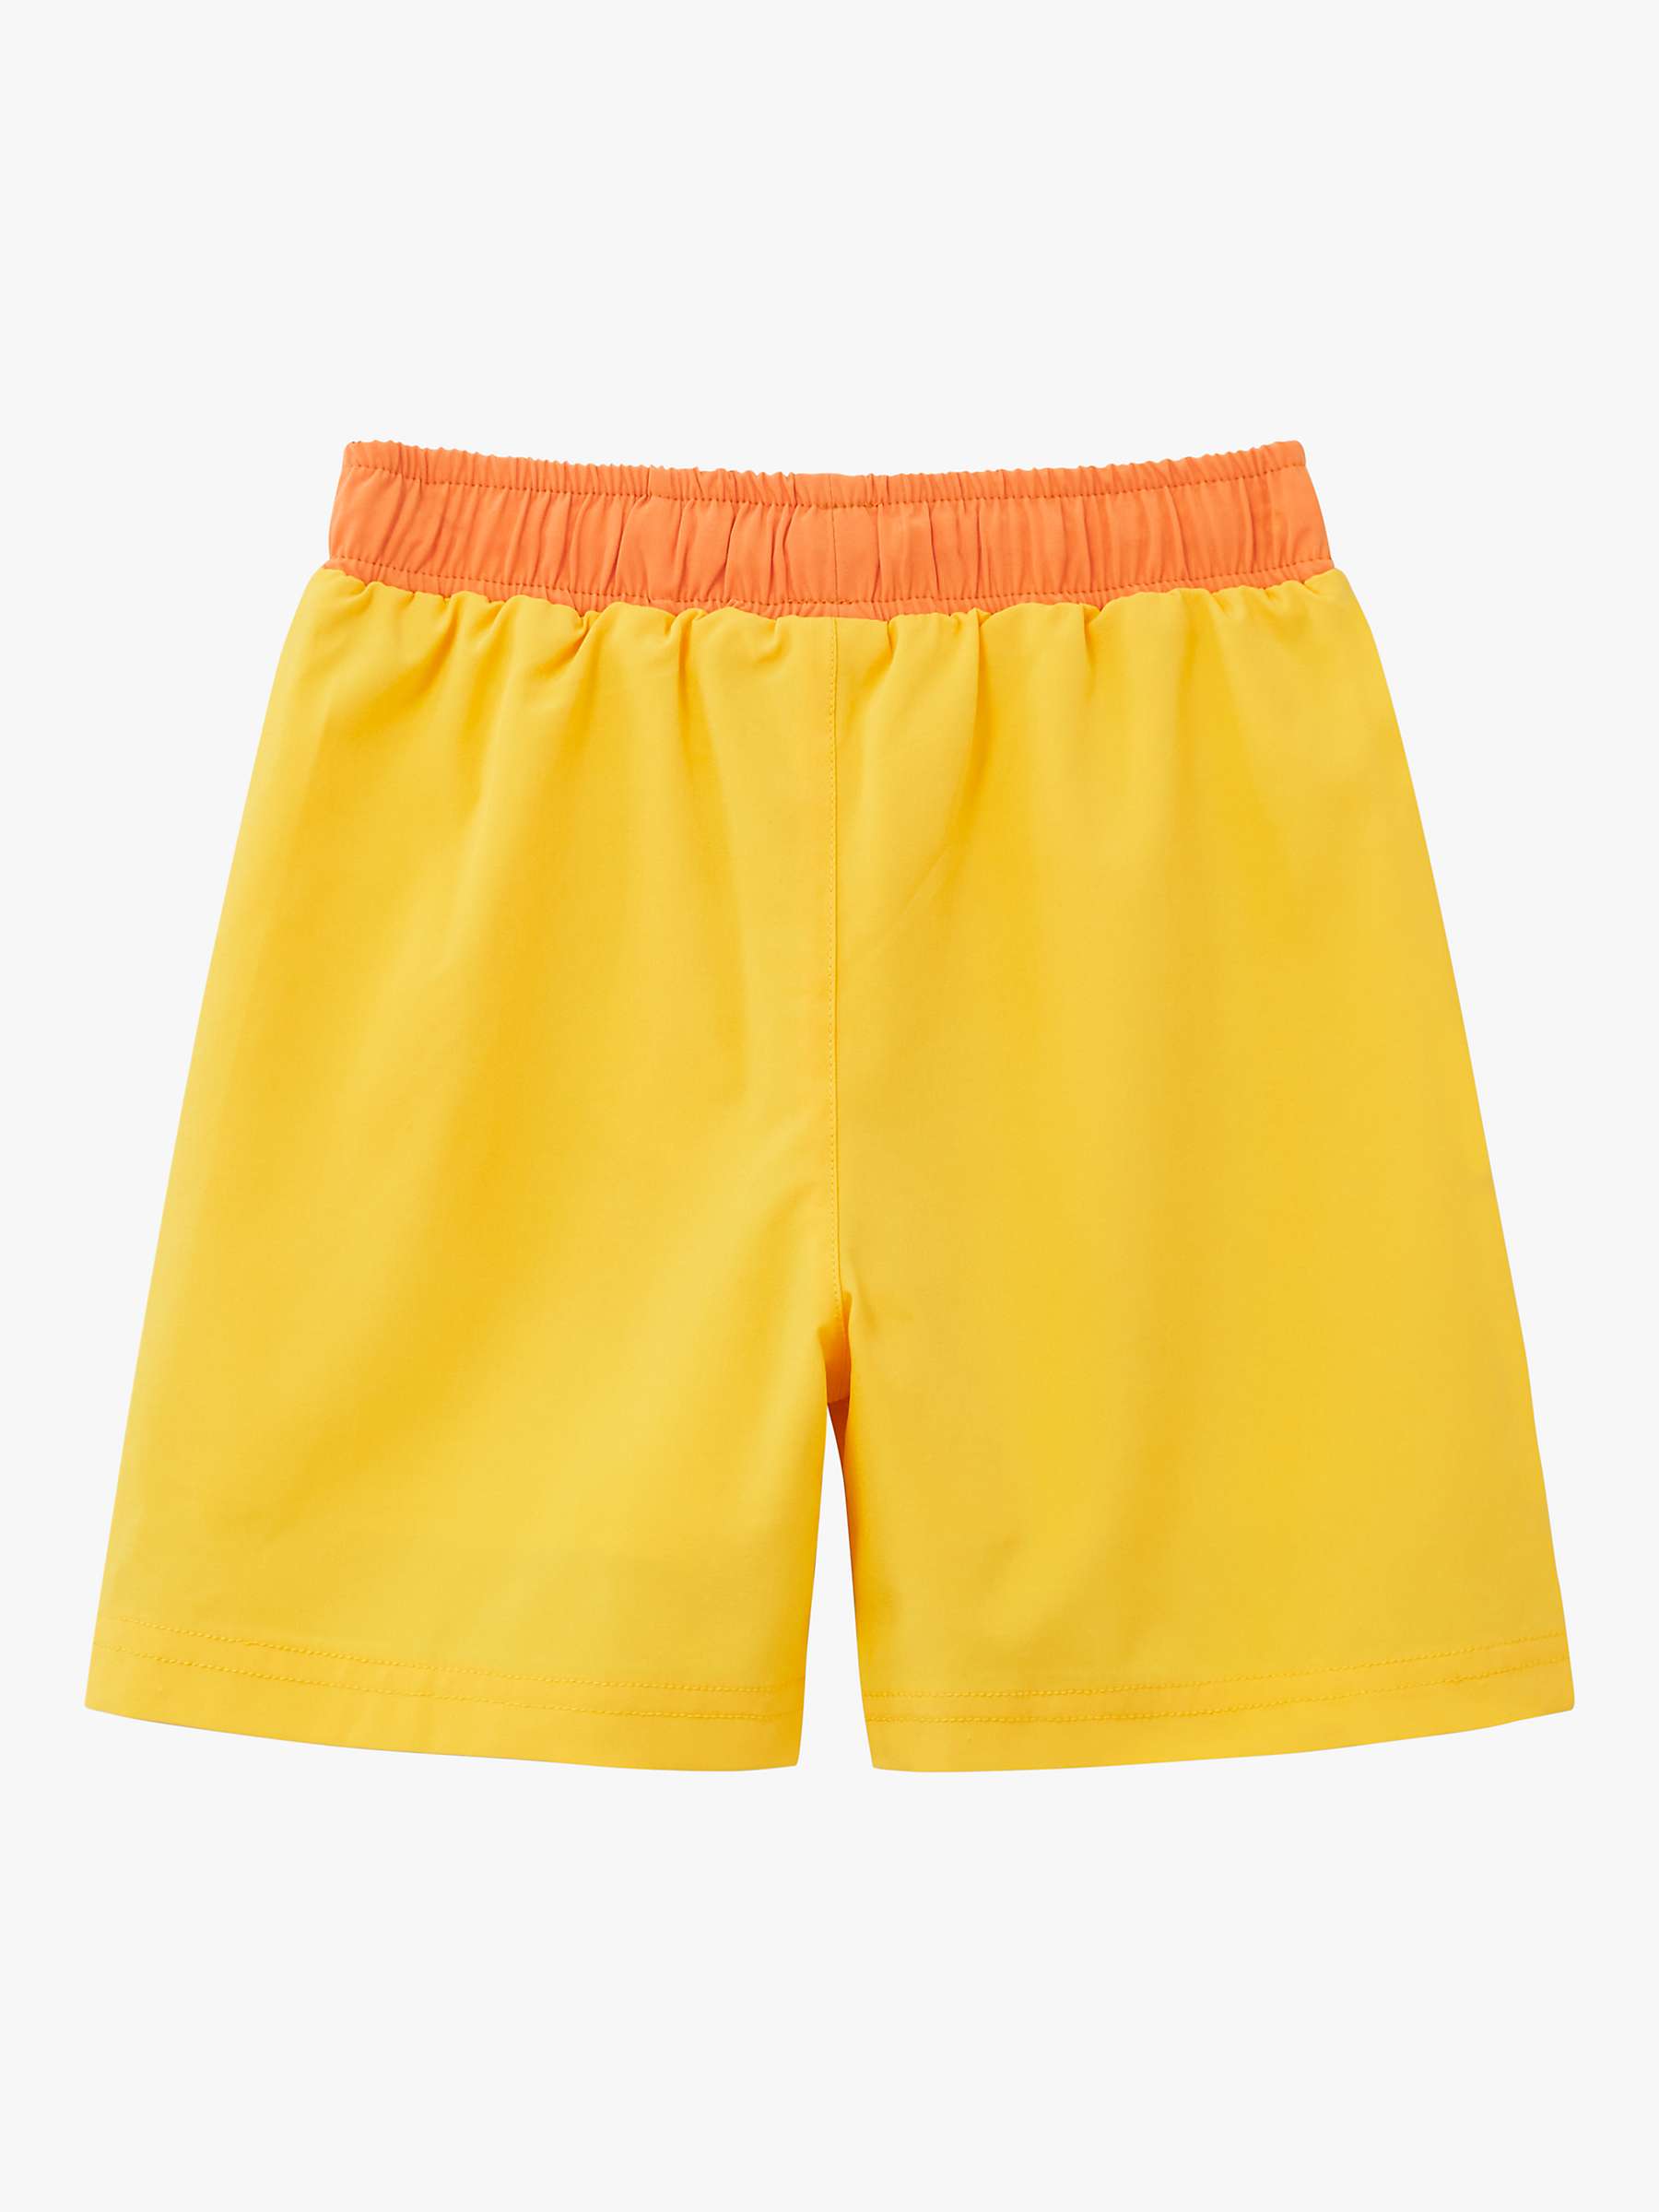 Buy Roarsome Kids' Cub The Lion Swim Shorts, Mid Yellow Online at johnlewis.com